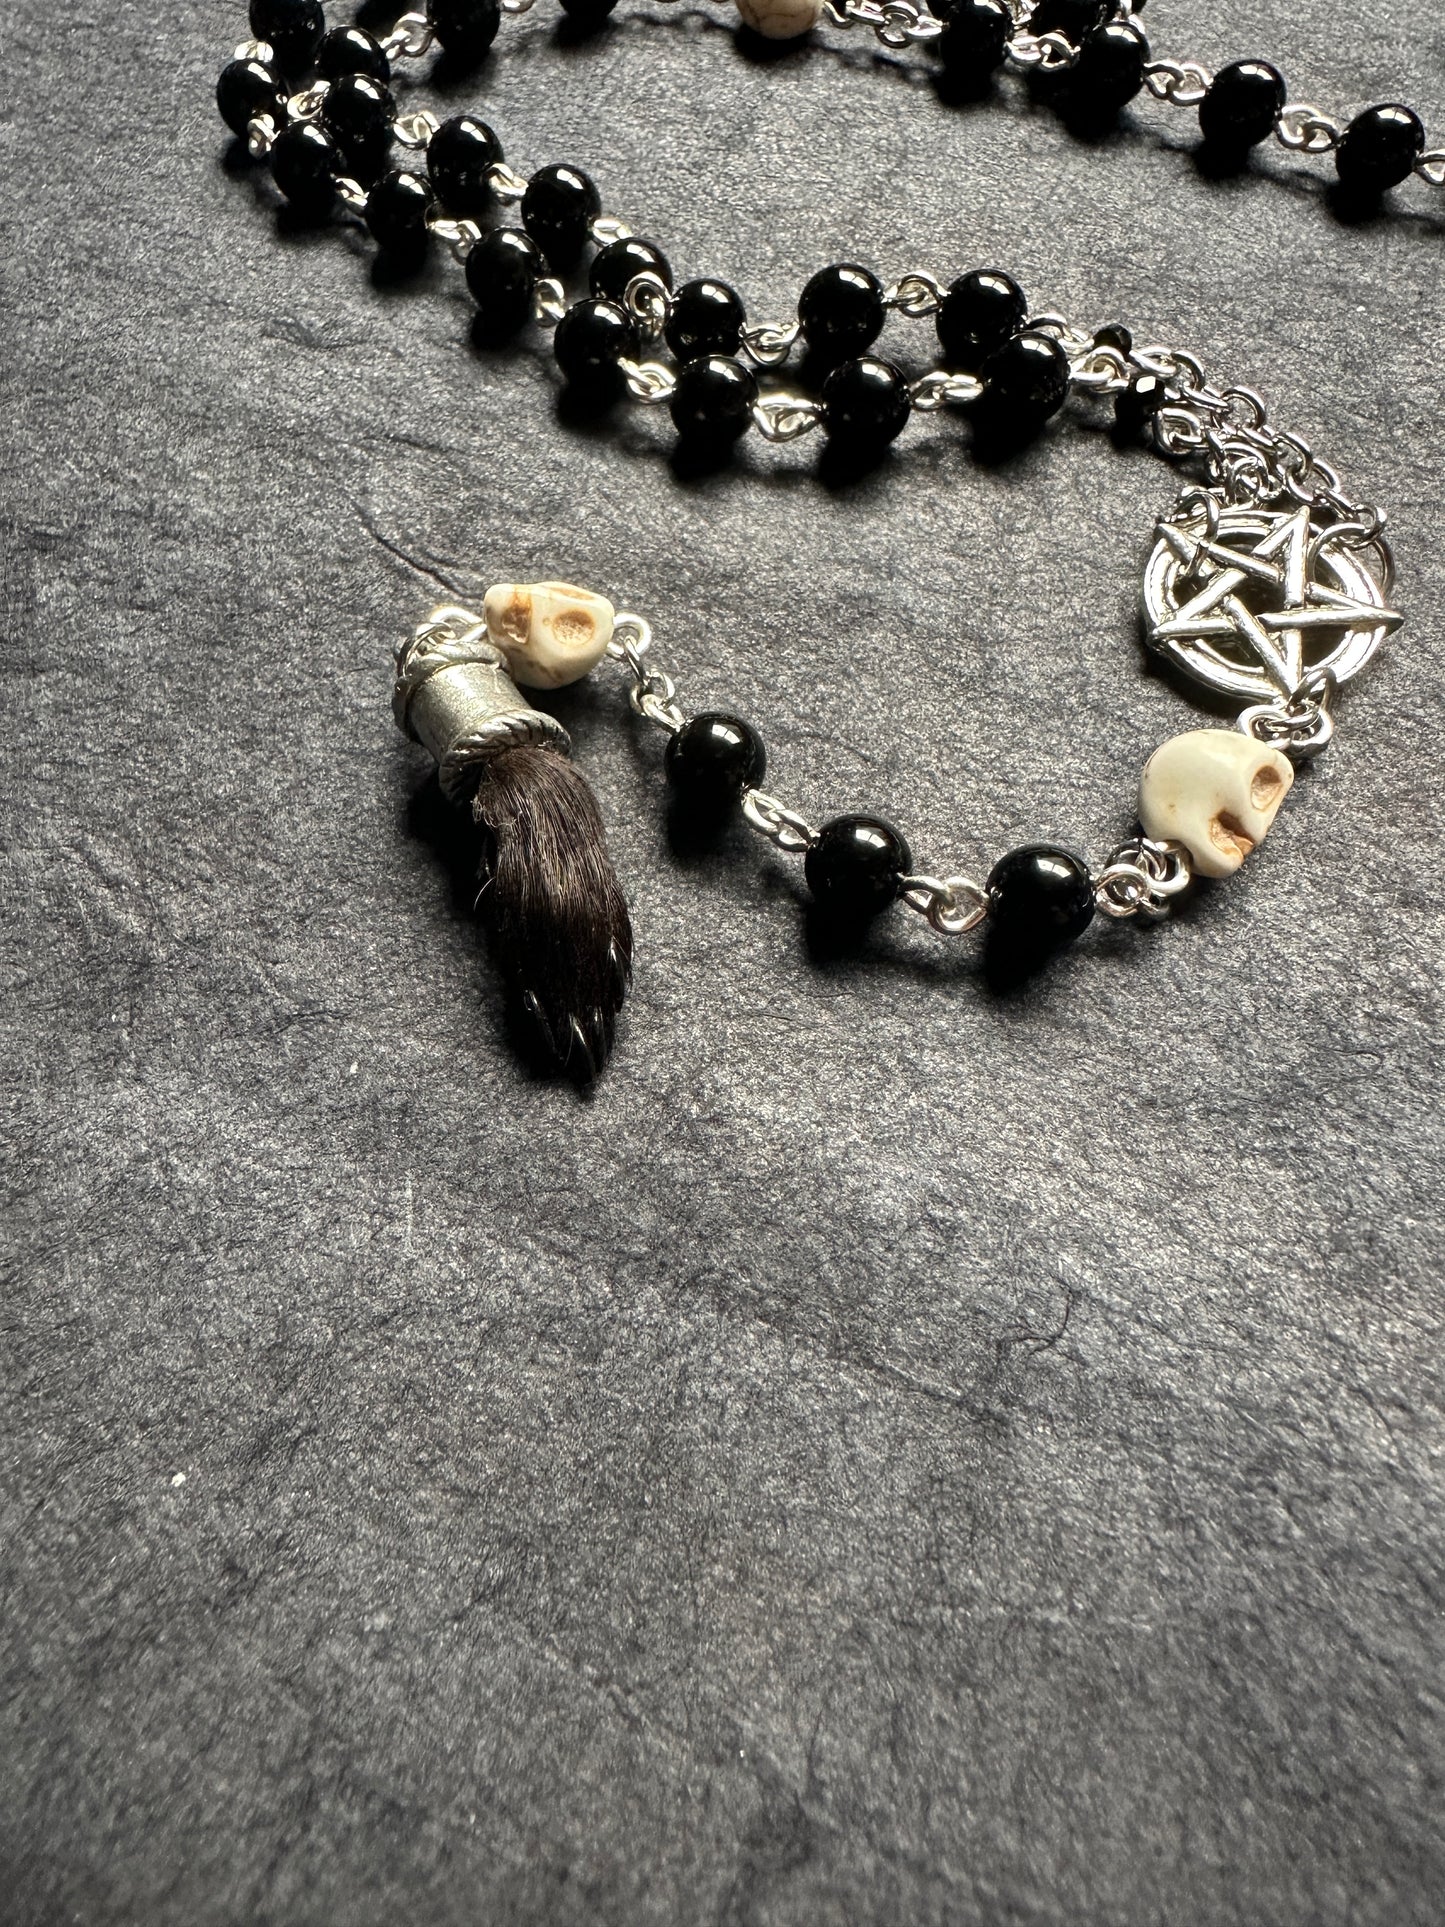 Black onyx rosary with Guinea pig paw and skull beads